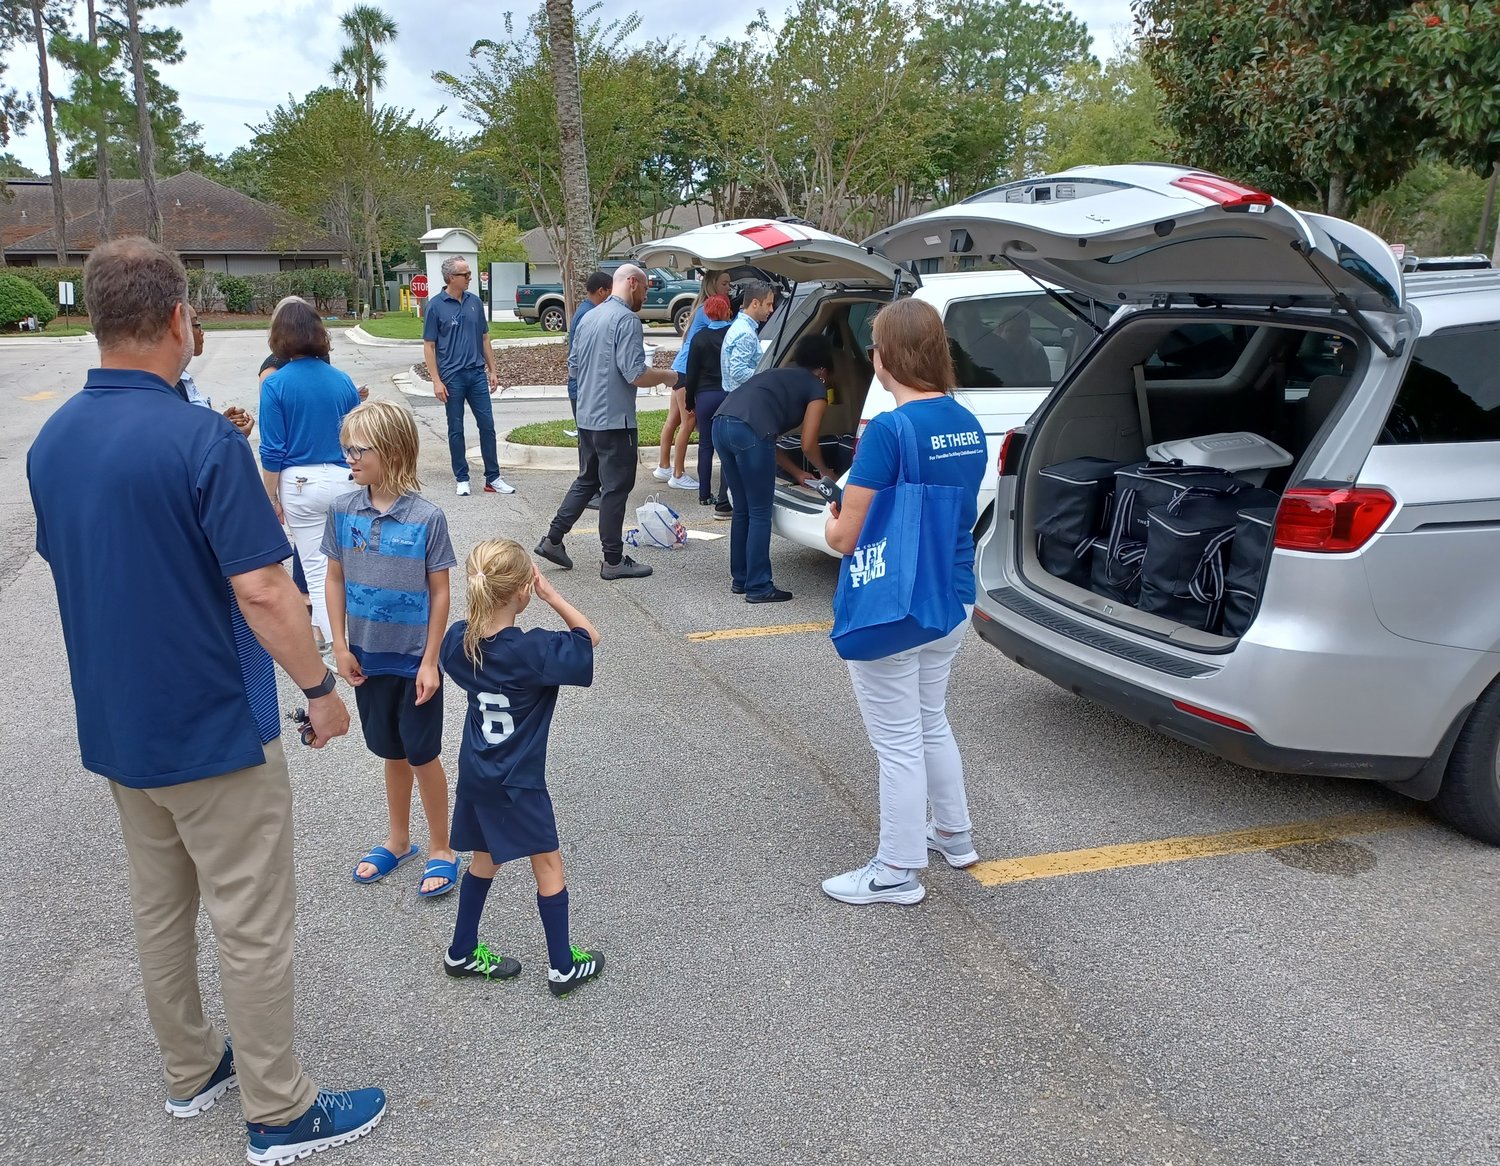 Volunteers pack automobiles with meals created for Jay Fund families by PGA TOUR Chef Eric Butcher and his team. The meals were delivered by volunteers to the families on Sept. 17.